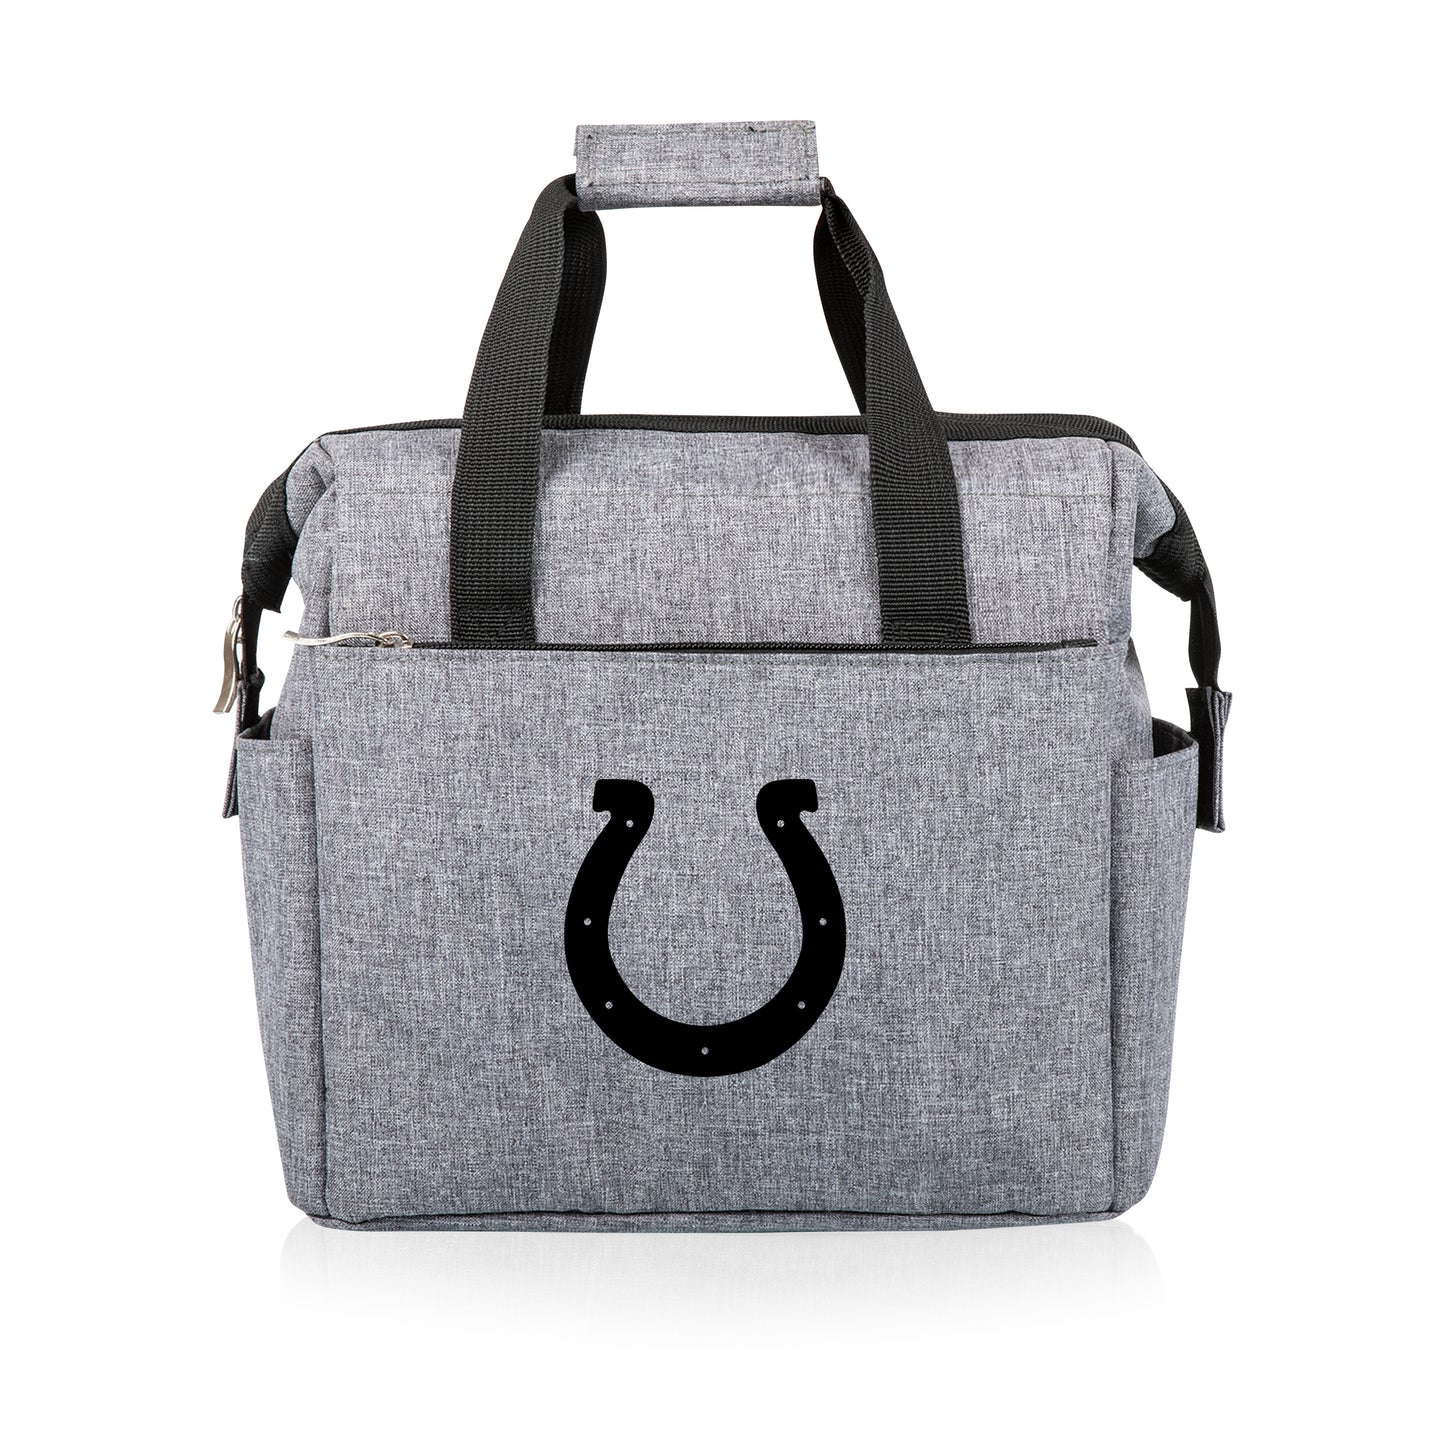 Indianapolis Colts - On The Go Lunch Cooler